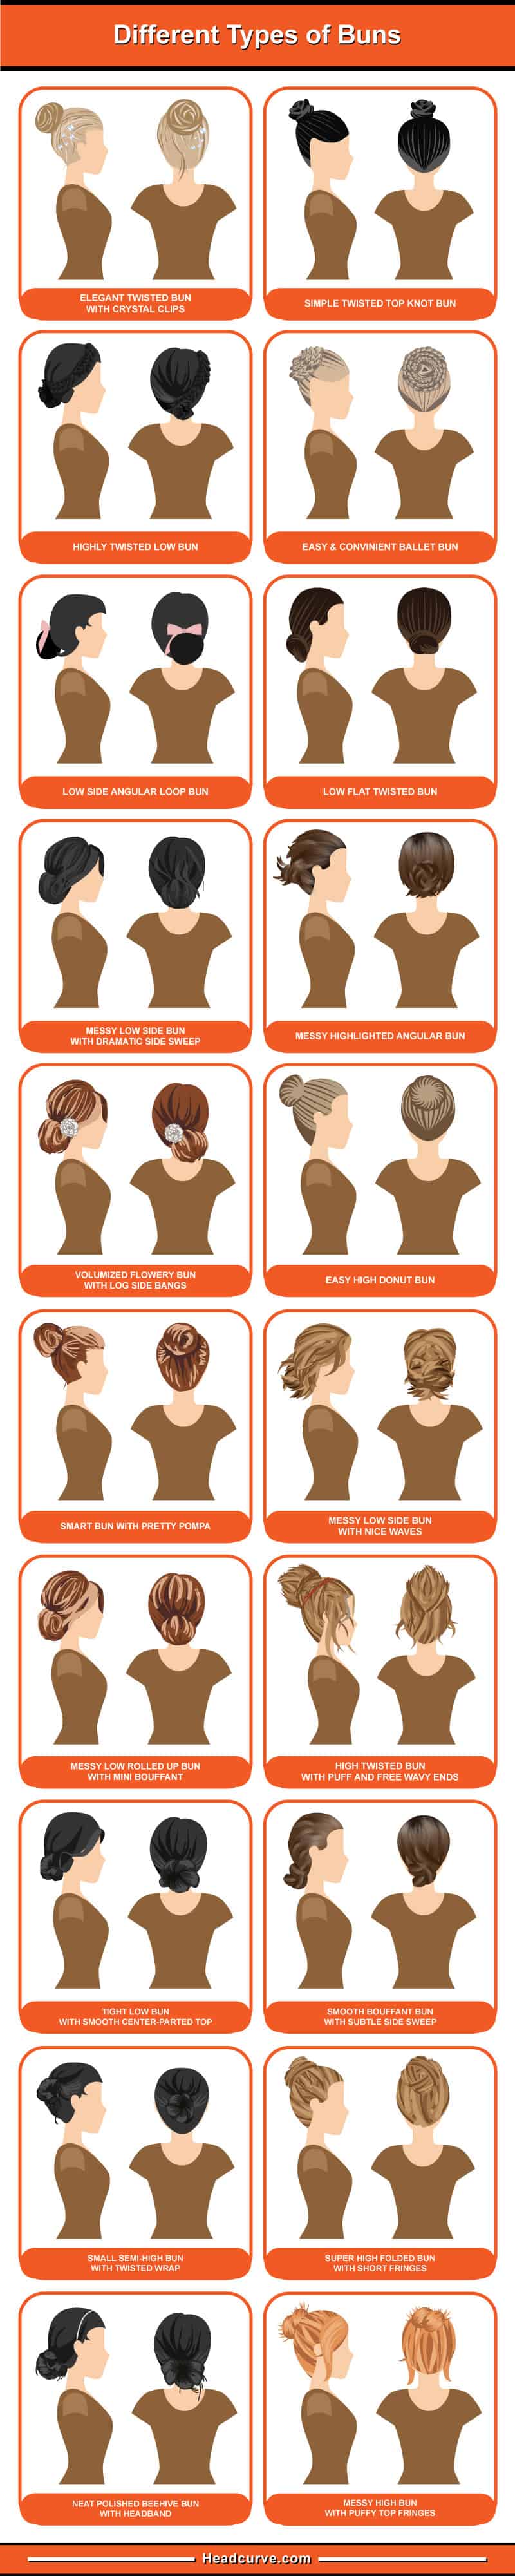 20 Types of Hair Bun Hairstyles for Women (Low, Braided, High etc.)